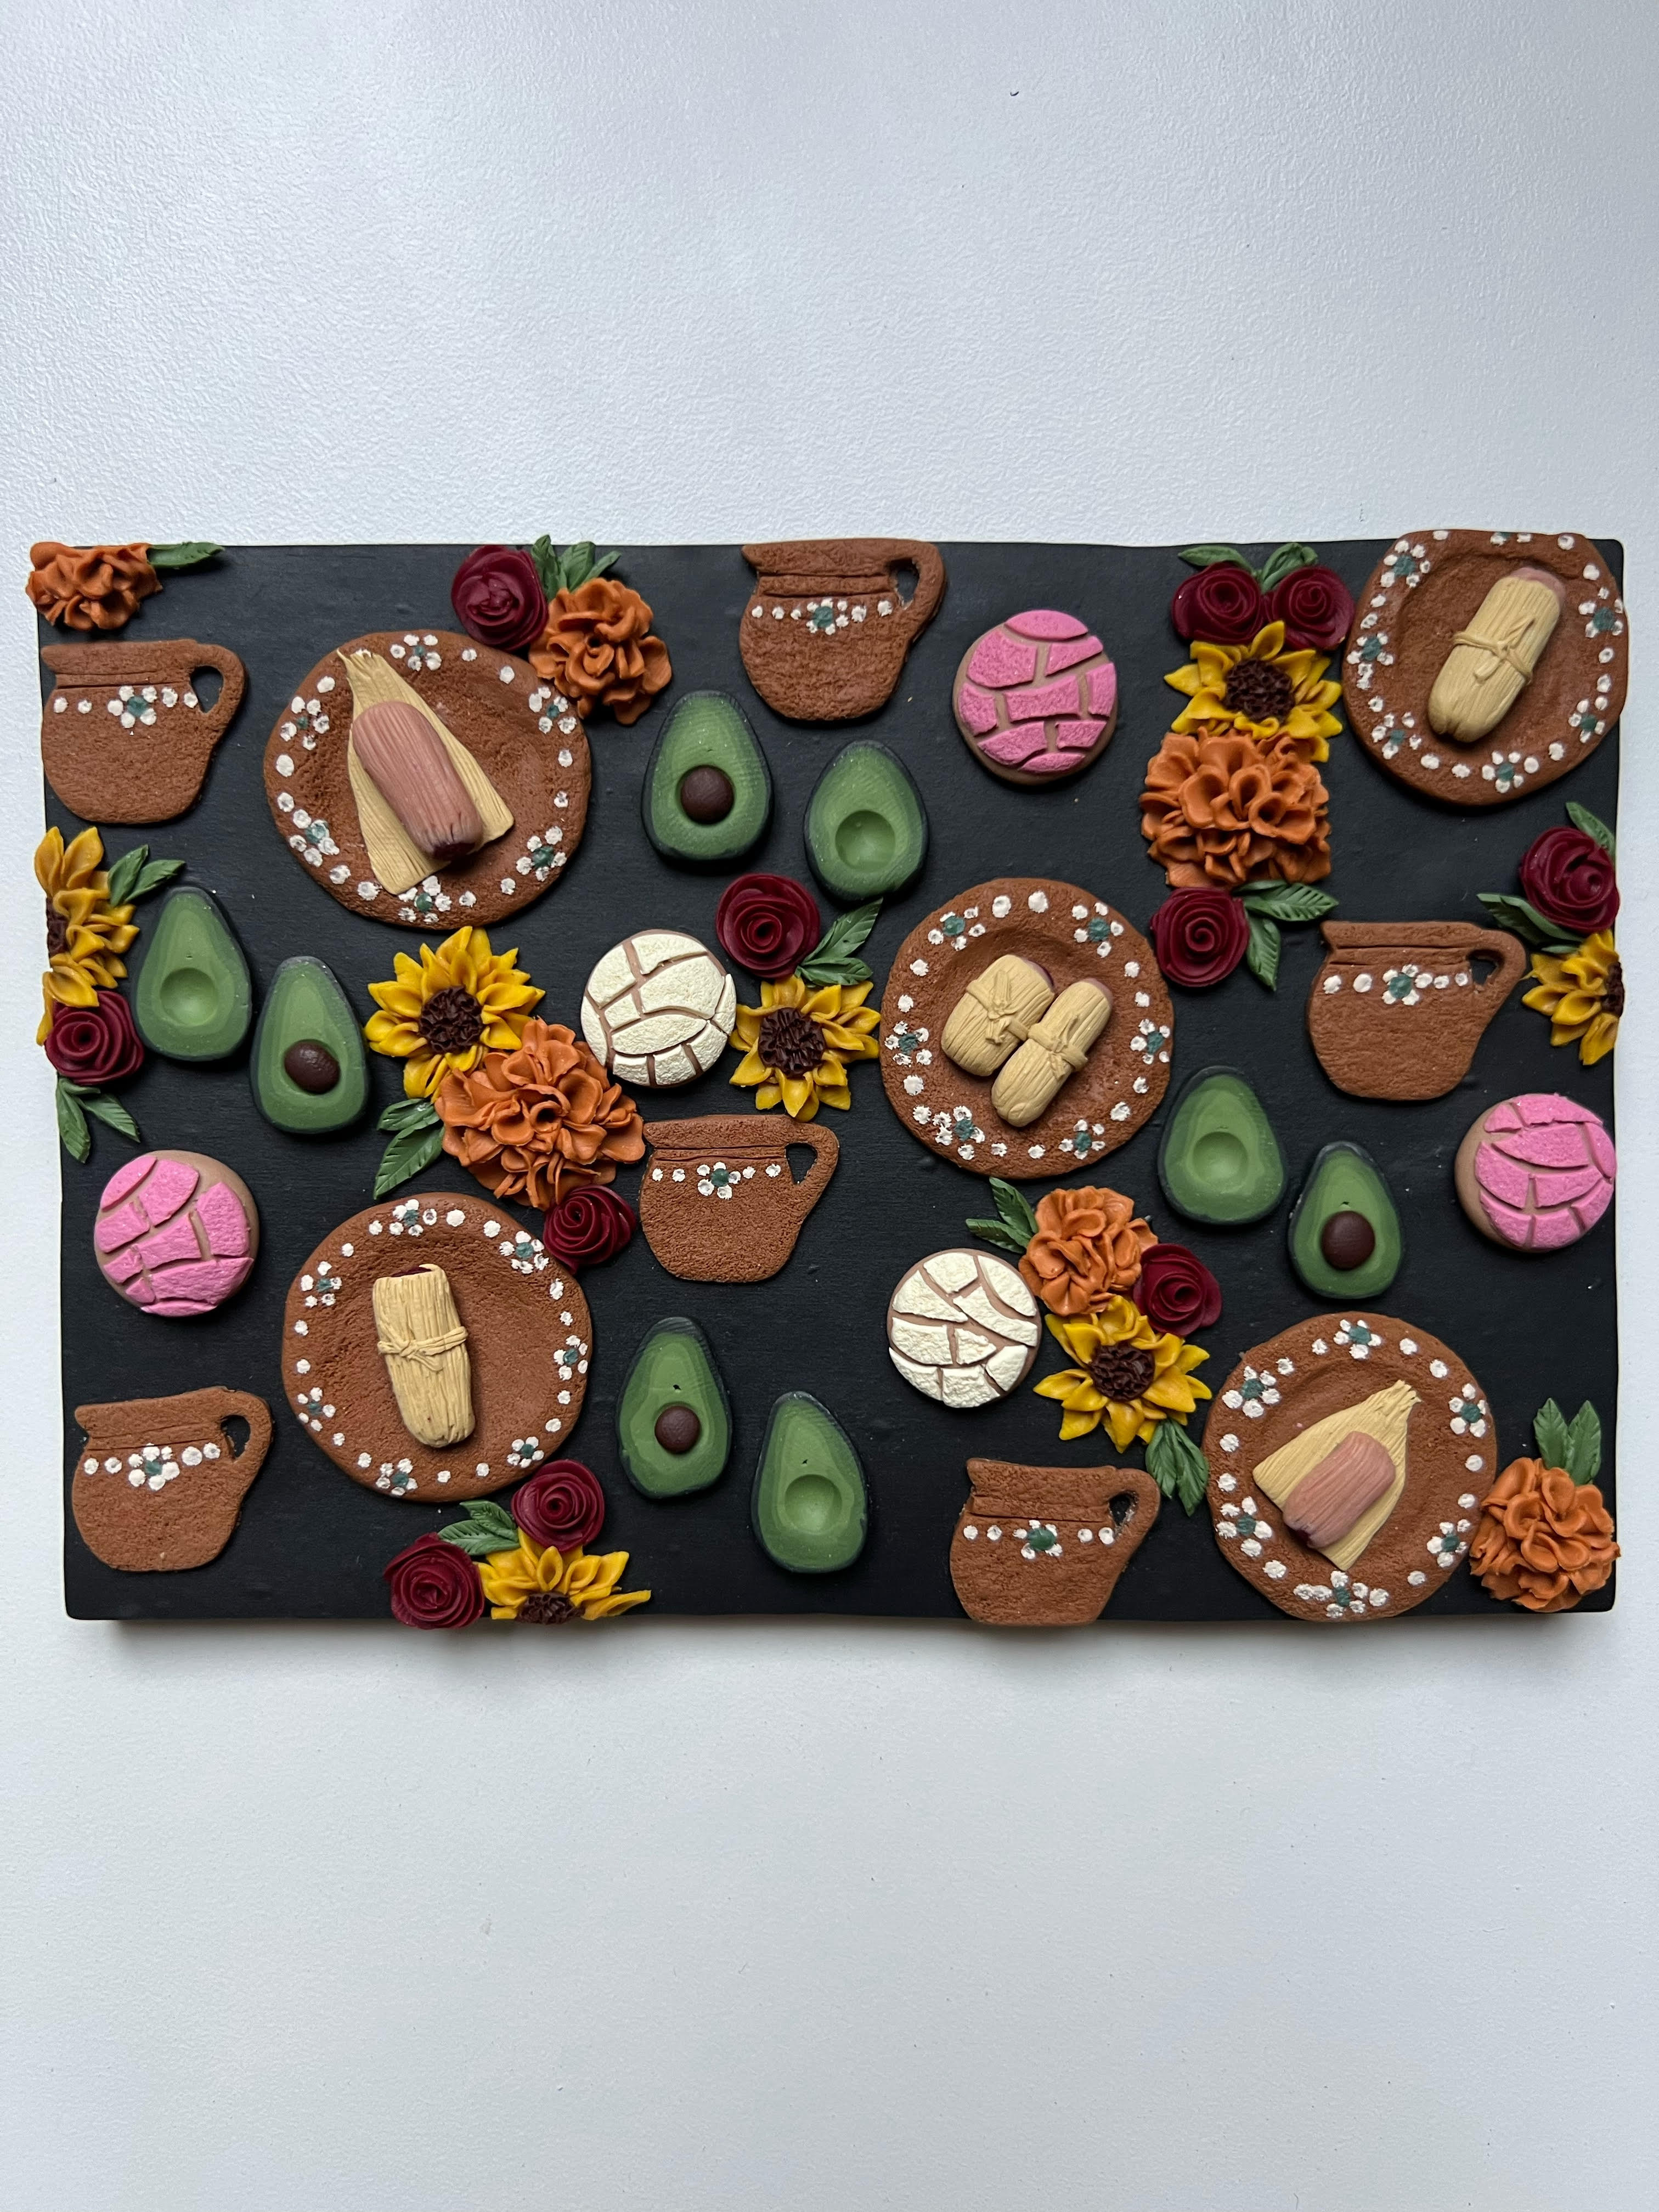 Polymer clay slab of tamales, avocados, flowers, and conchas